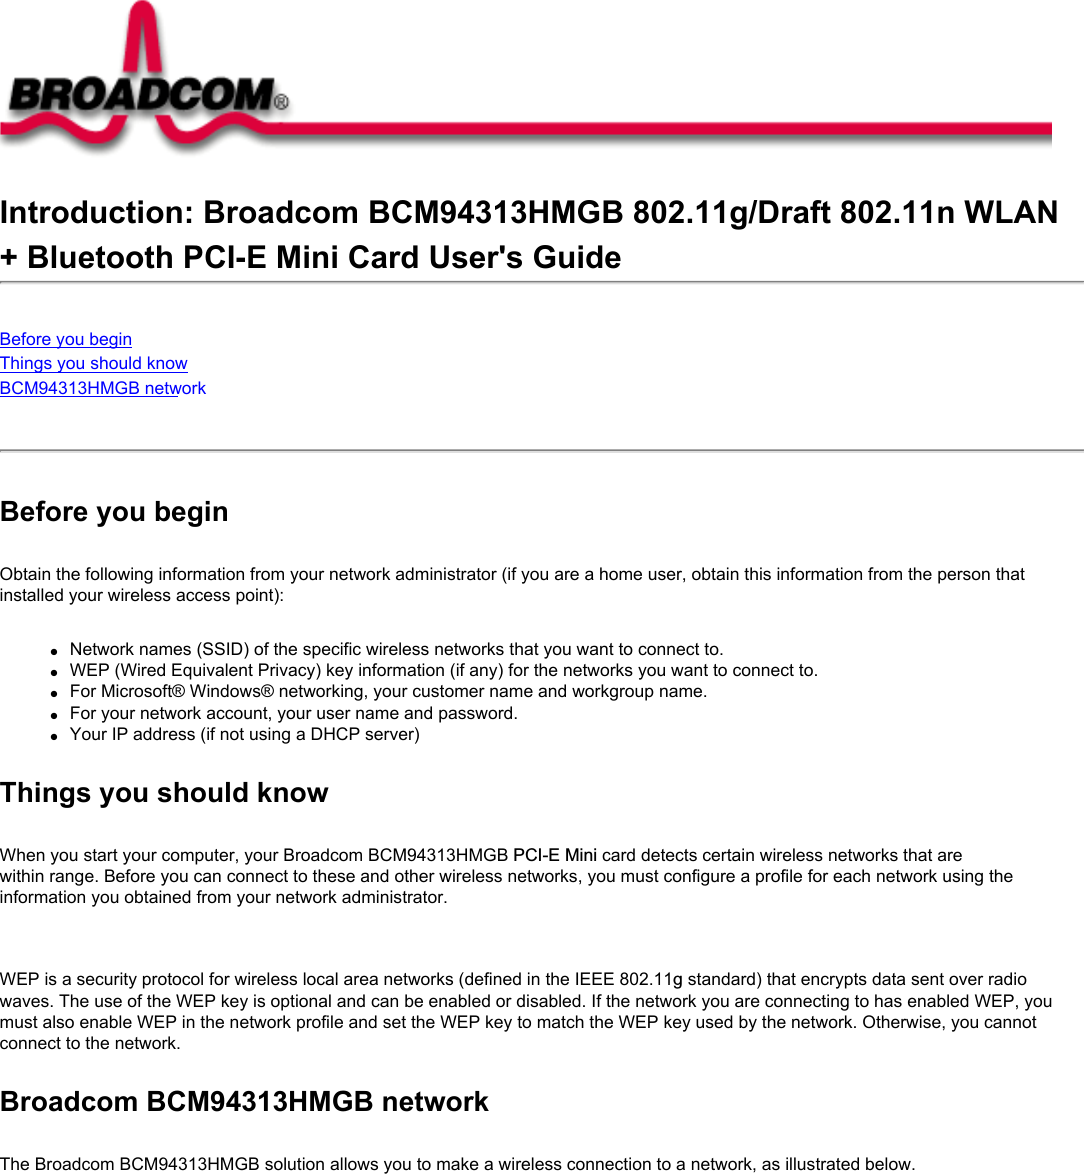 Introduction: Broadcom BCM94313HMGB 802.11g/Draft 802.11n WLAN+ Bluetooth PCI-E Mini Card User&apos;s GuideBefore you beginThings you should knowBCM94313HMGB network Before you beginObtain the following information from your network administrator (if you are a home user, obtain this information from the person that installed your wireless access point):●     Network names (SSID) of the specific wireless networks that you want to connect to.●     WEP (Wired Equivalent Privacy) key information (if any) for the networks you want to connect to.●     For Microsoft® Windows® networking, your customer name and workgroup name.●     For your network account, your user name and password.●     Your IP address (if not using a DHCP server)Things you should knowWhen you start your computer, your Broadcom BCM94313HMGB PCI-E Mini card detects certain wireless networks that are within range. Before you can connect to these and other wireless networks, you must configure a profile for each network using the information you obtained from your network administrator.   WEP is a security protocol for wireless local area networks (defined in the IEEE 802.11g standard) that encrypts data sent over radio waves. The use of the WEP key is optional and can be enabled or disabled. If the network you are connecting to has enabled WEP, you must also enable WEP in the network profile and set the WEP key to match the WEP key used by the network. Otherwise, you cannot connect to the network.Broadcom BCM94313HMGB networkThe Broadcom BCM94313HMGB solution allows you to make a wireless connection to a network, as illustrated below.